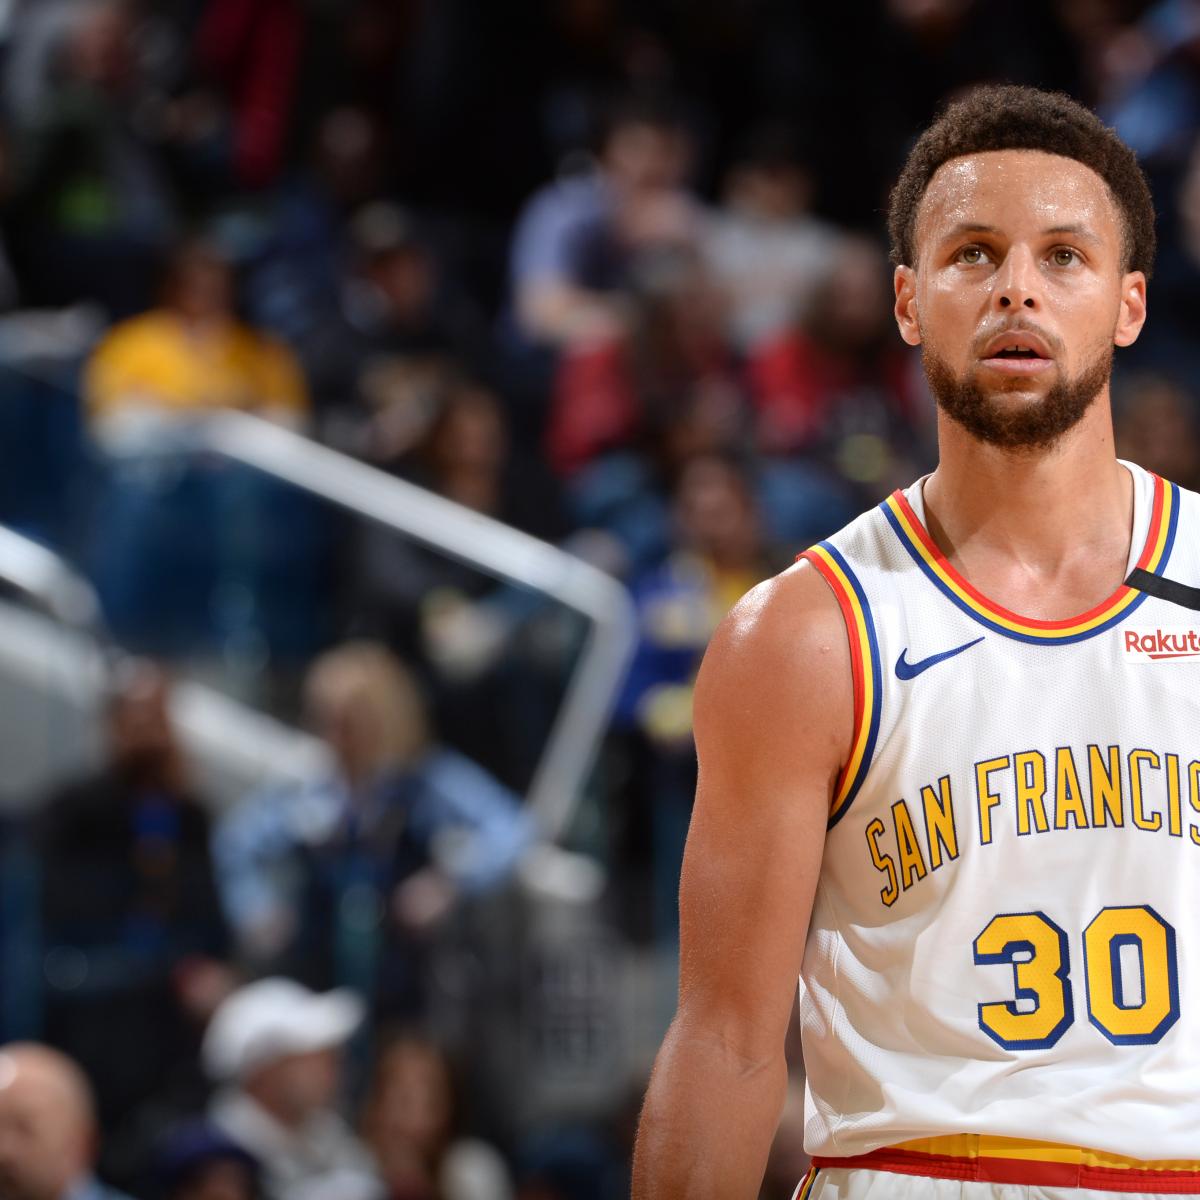 Steph Curry Has a Subtle Response to People Who Don't Like His